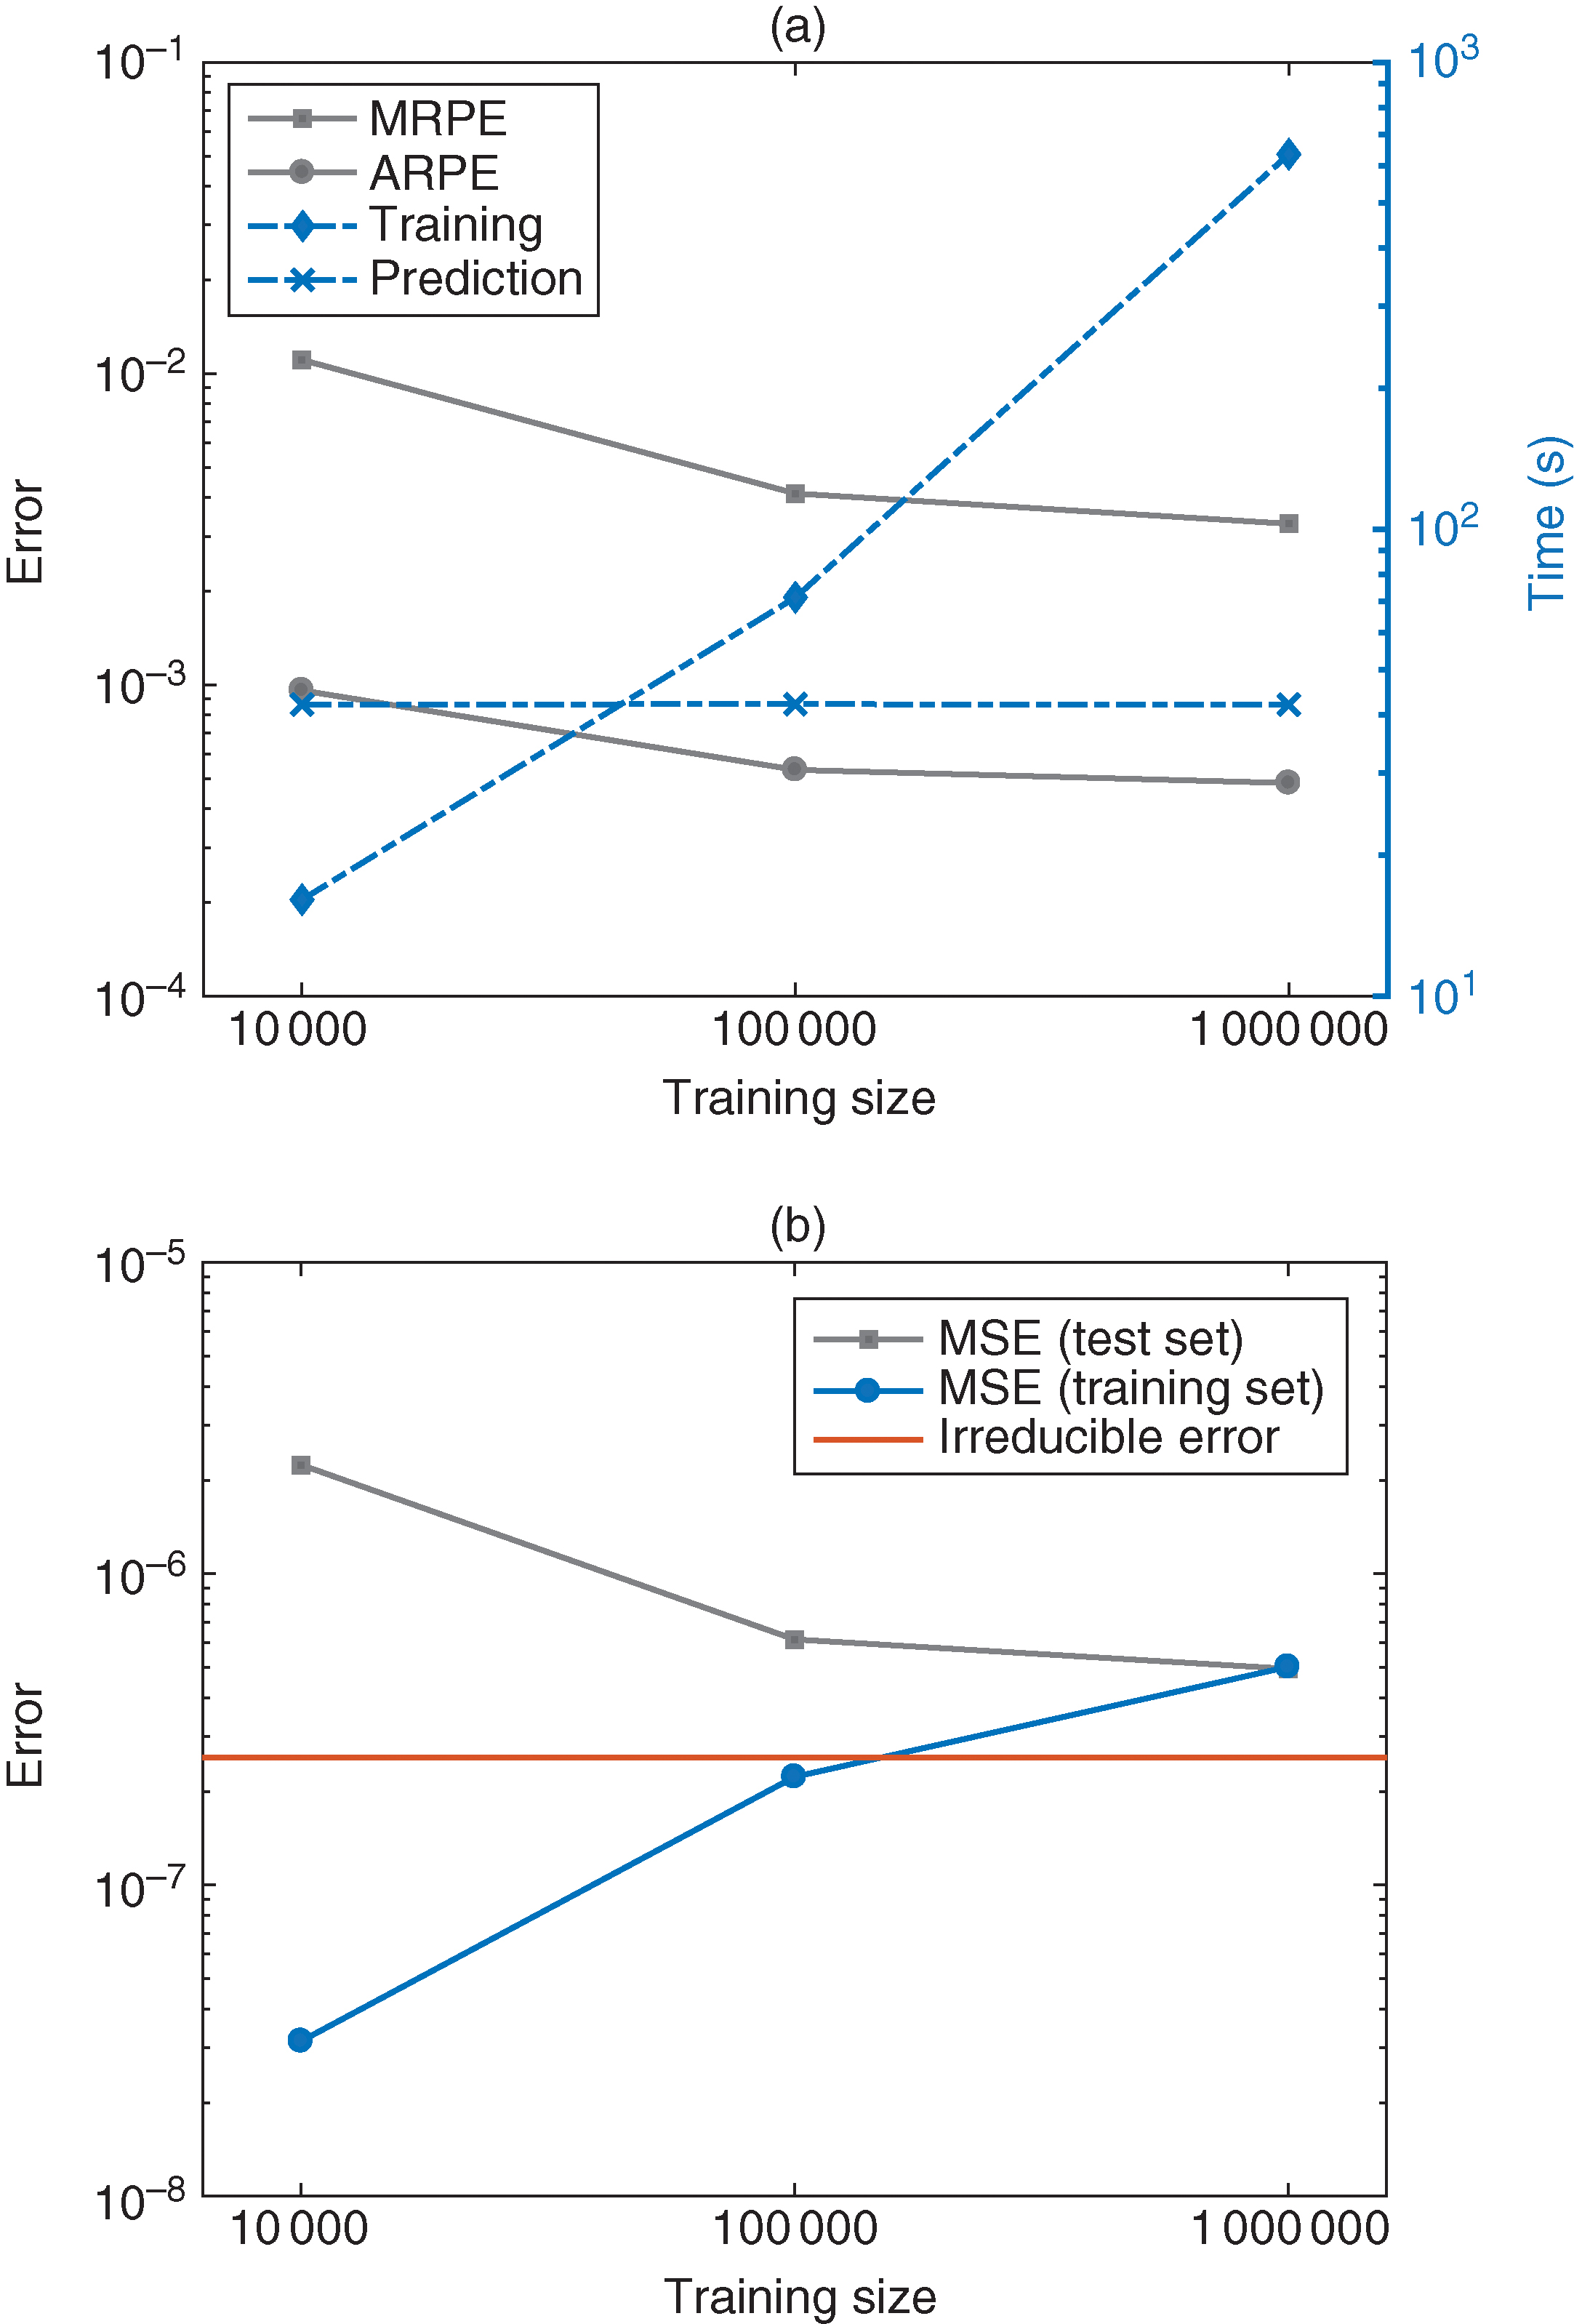 GBM performance for bonus certificates in function of the training set size. (a) Predictive and computational performance. Errors are measured out-of-sample. (b) In-sample and out-of-sample MSEs versus irreducible error.